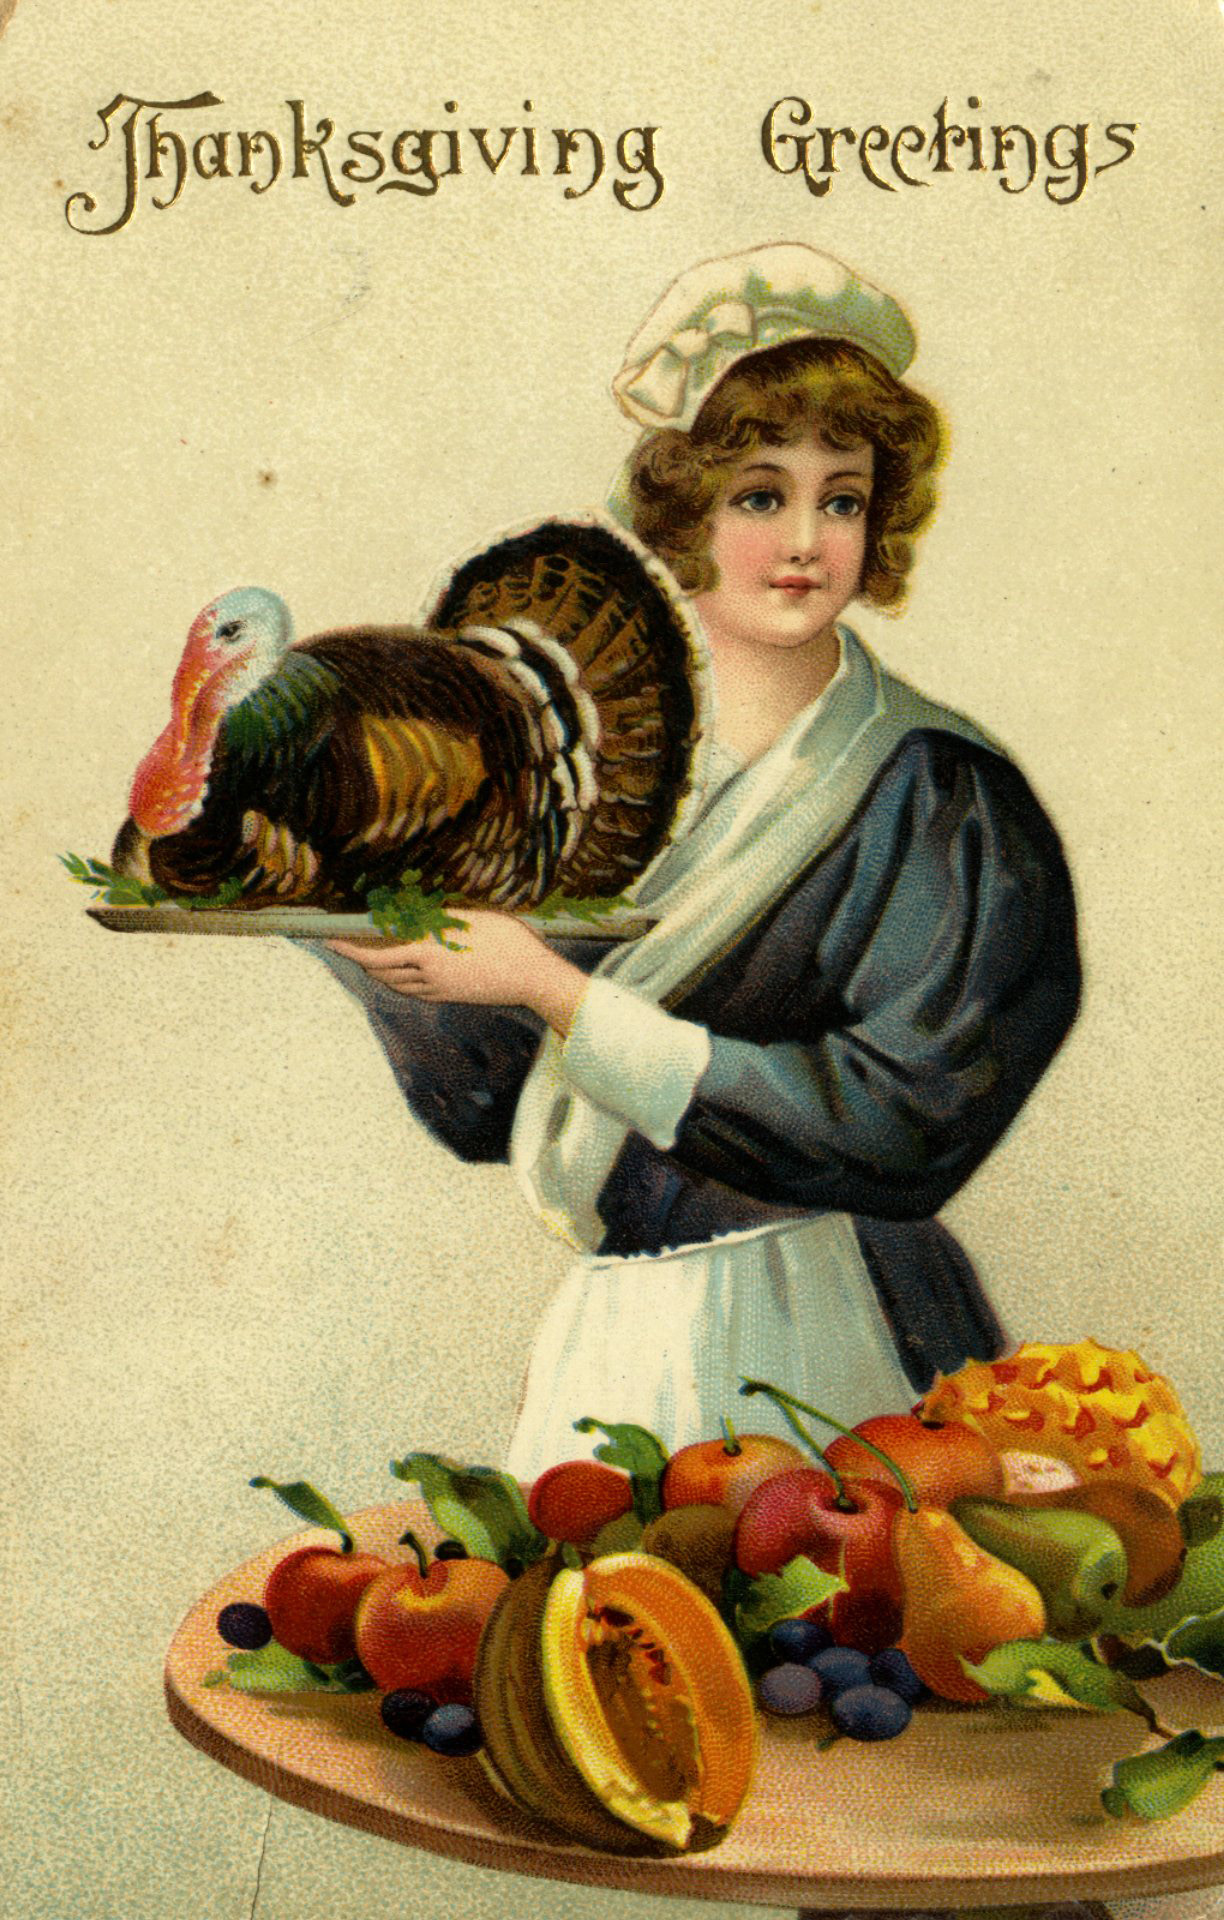 Happy Thanksgiving!: Postcards from Special Collections | Walter ...